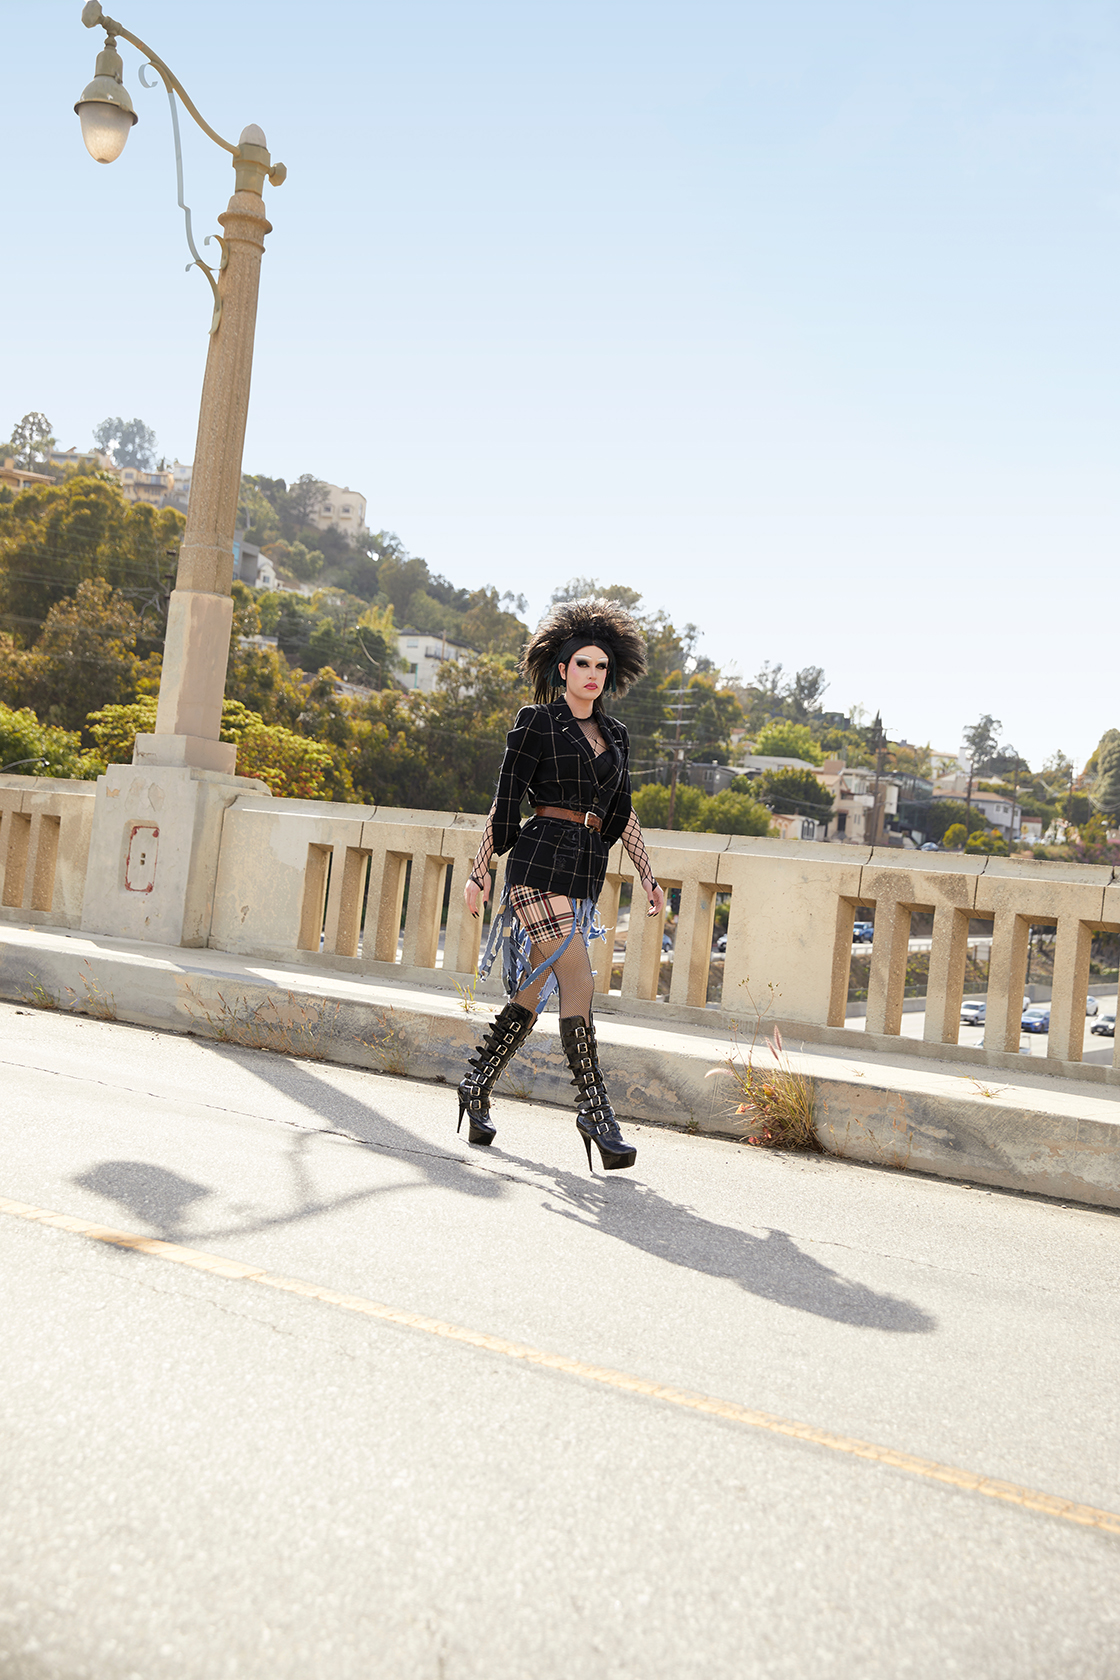 Full body image of Jesse in Punk inspired drag on a highway overpass walking forward and looking sideways toward the camera